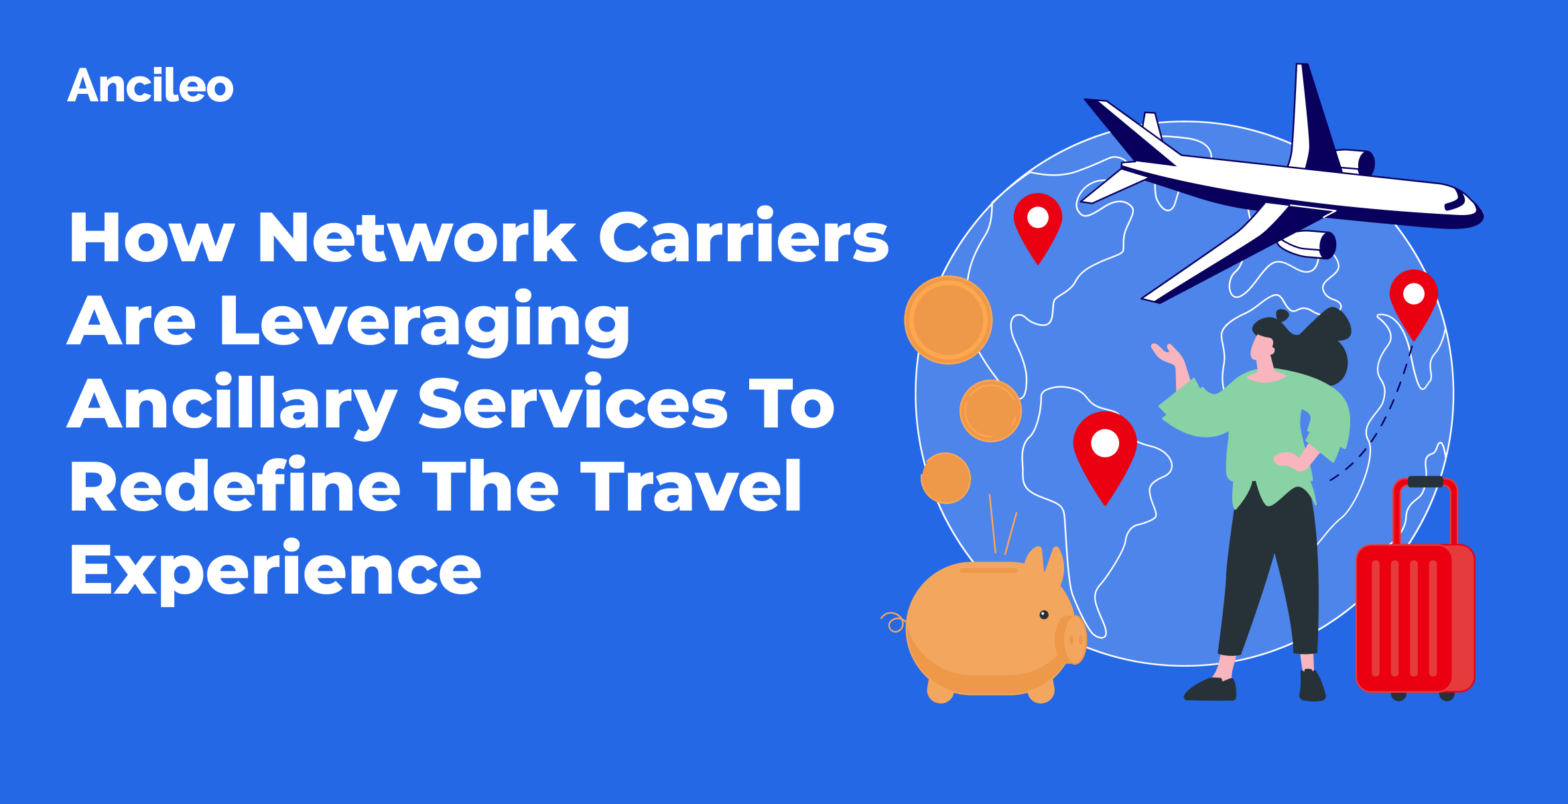 How Network Carriers Are Leveraging Ancillary Services To Redefine The Travel Experience